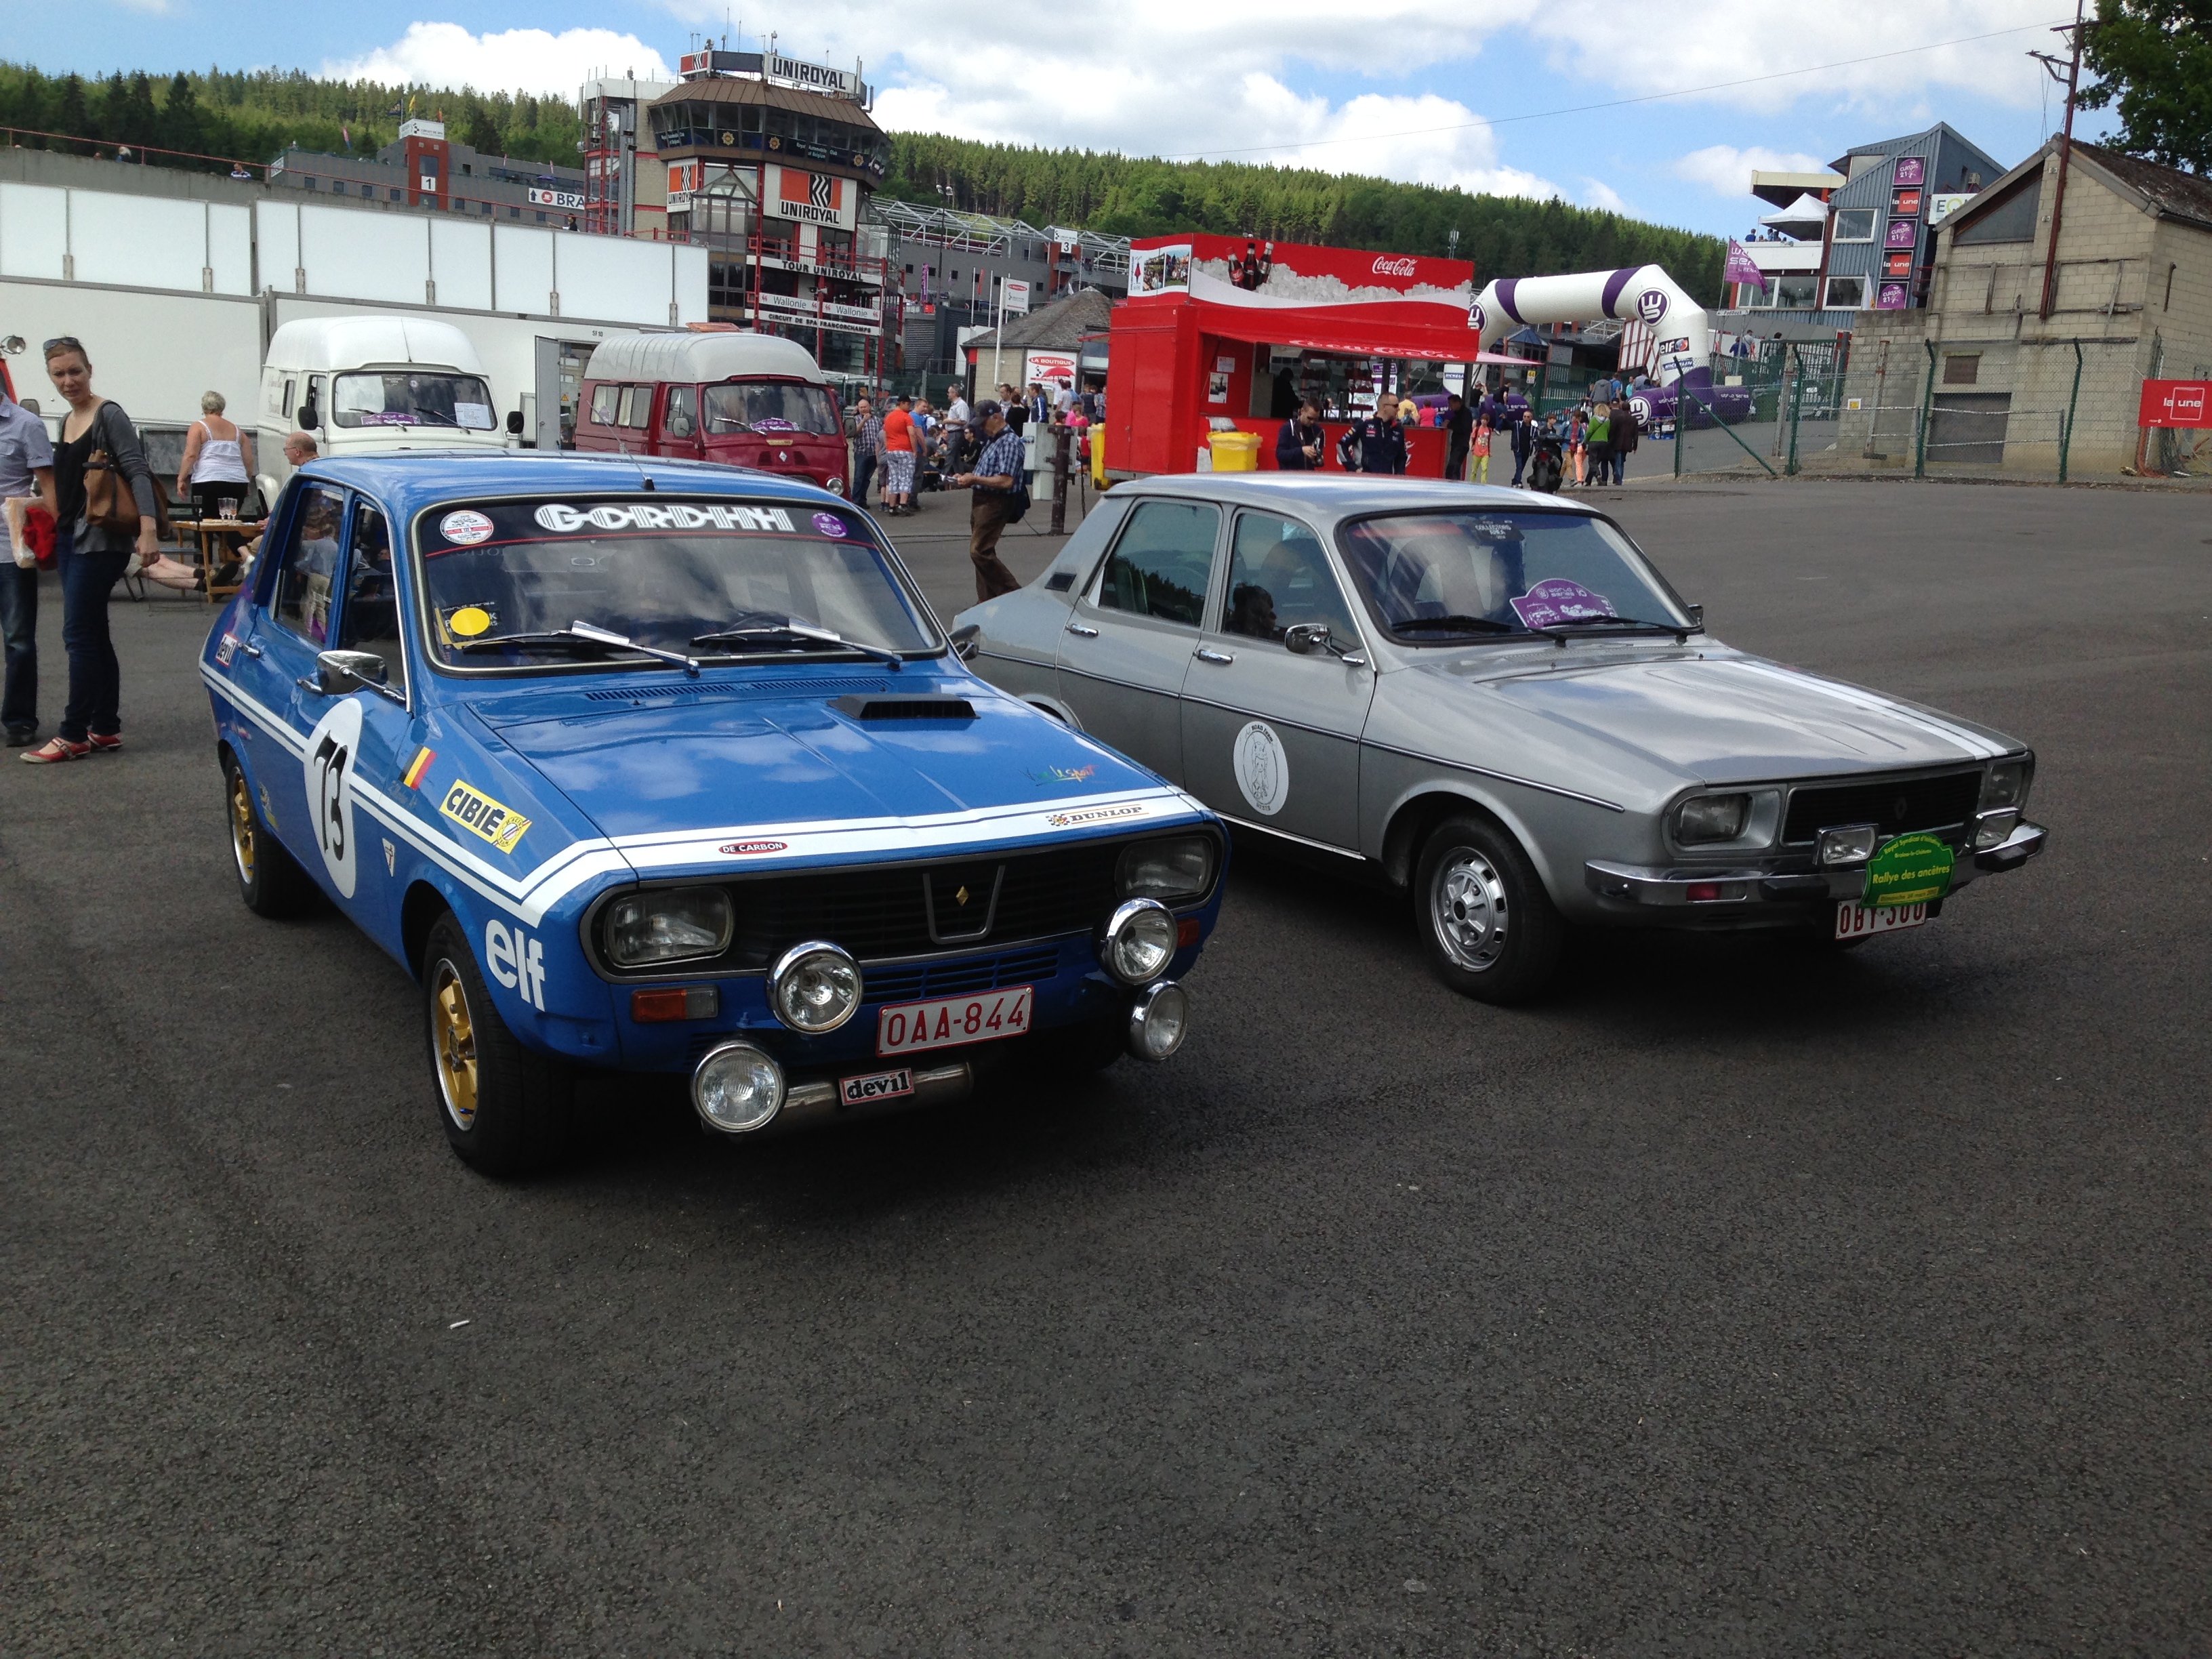 world serie by renault Spa le 30.31.1 juin 2014 14060110185717380112281612